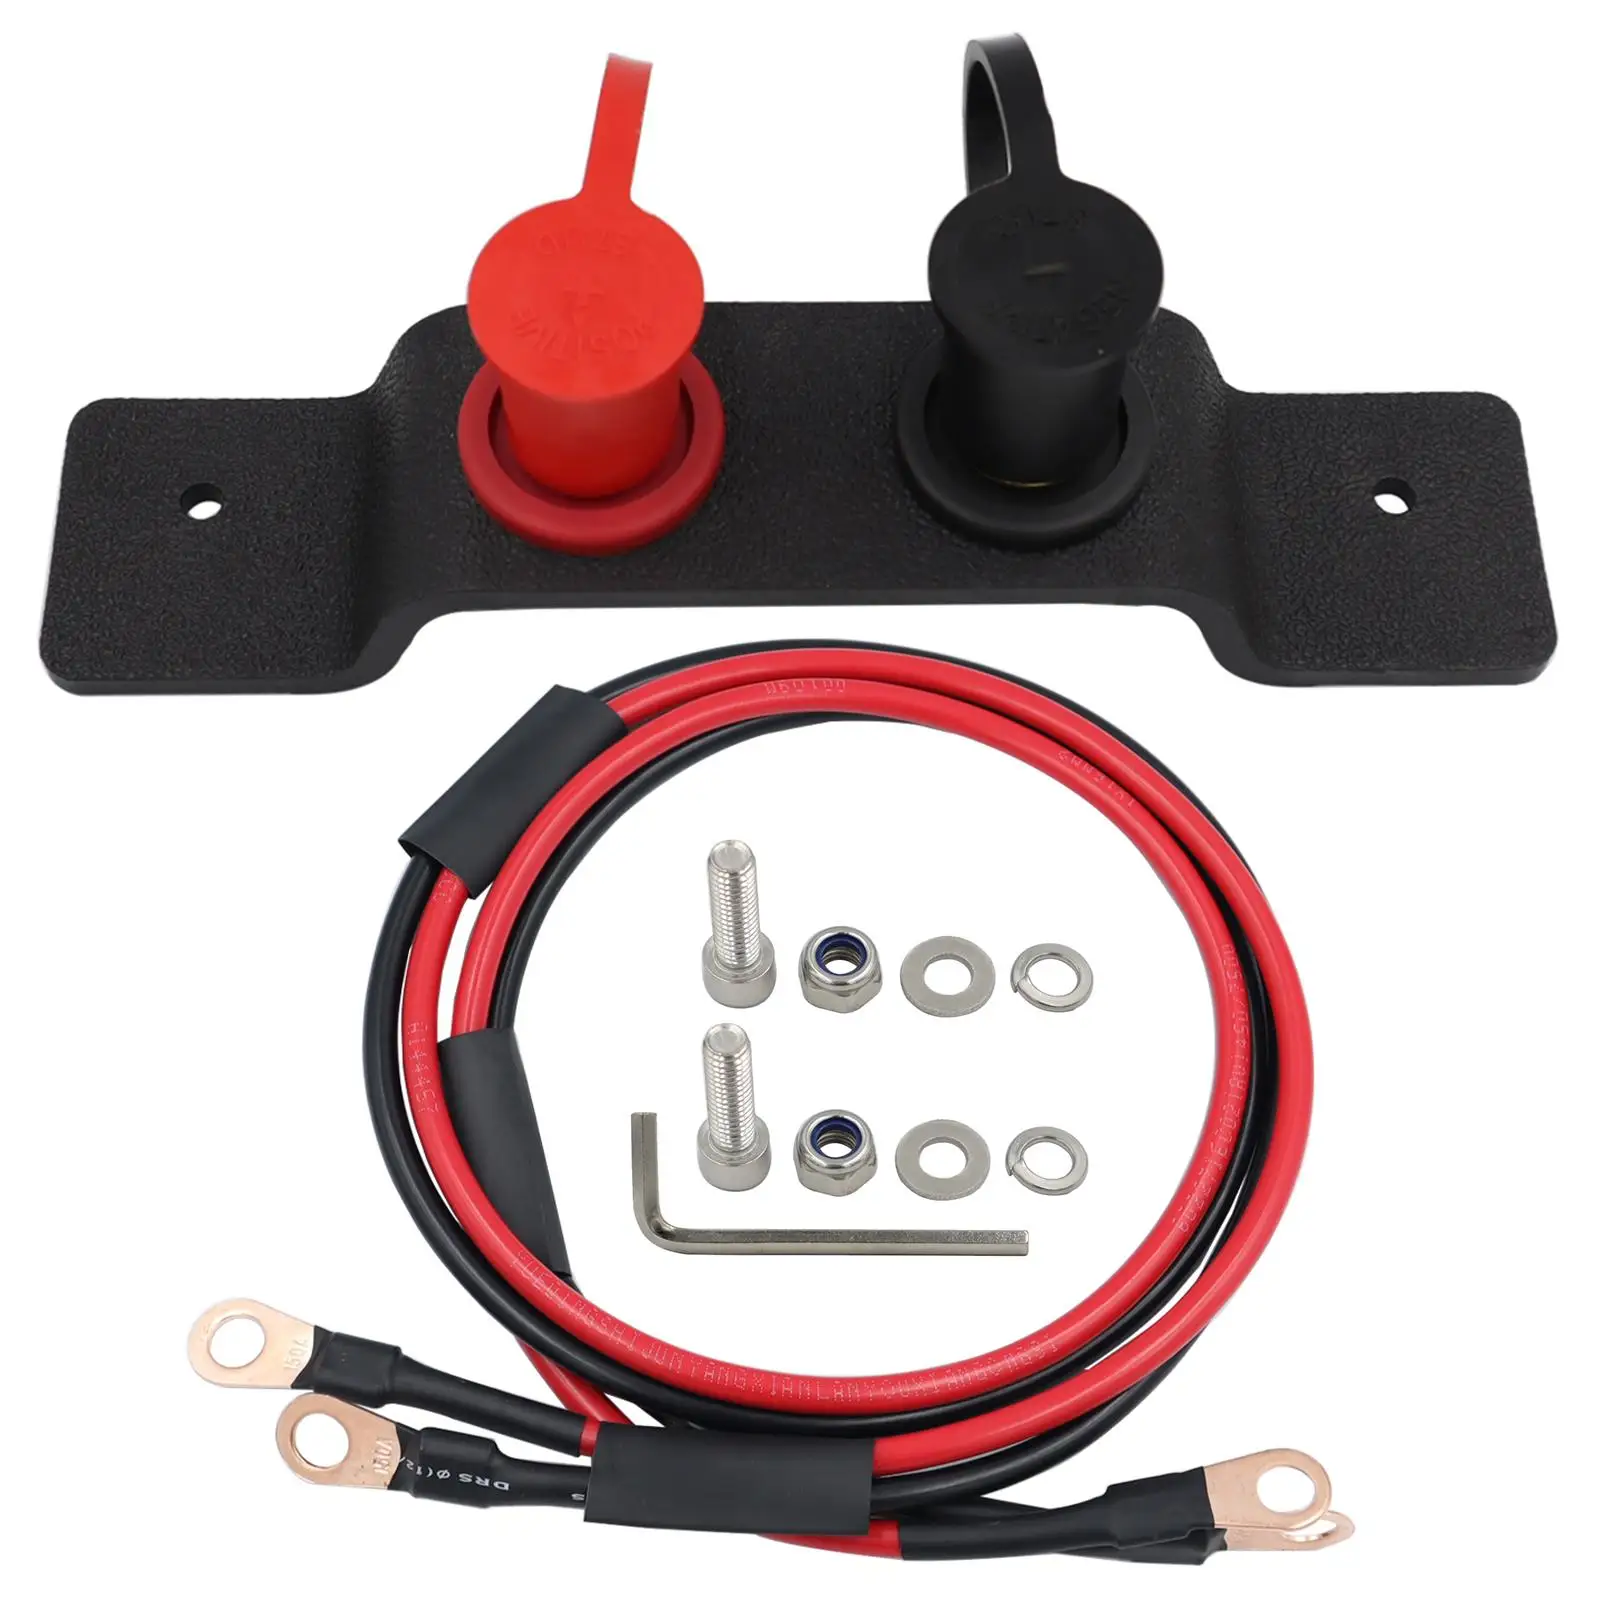 Car Battery Jump Post Starter Battery Terminals Relocation Kit Quick Easy Charging Fit for Can AM x3 Lawn Mowers UTV ATV Boats